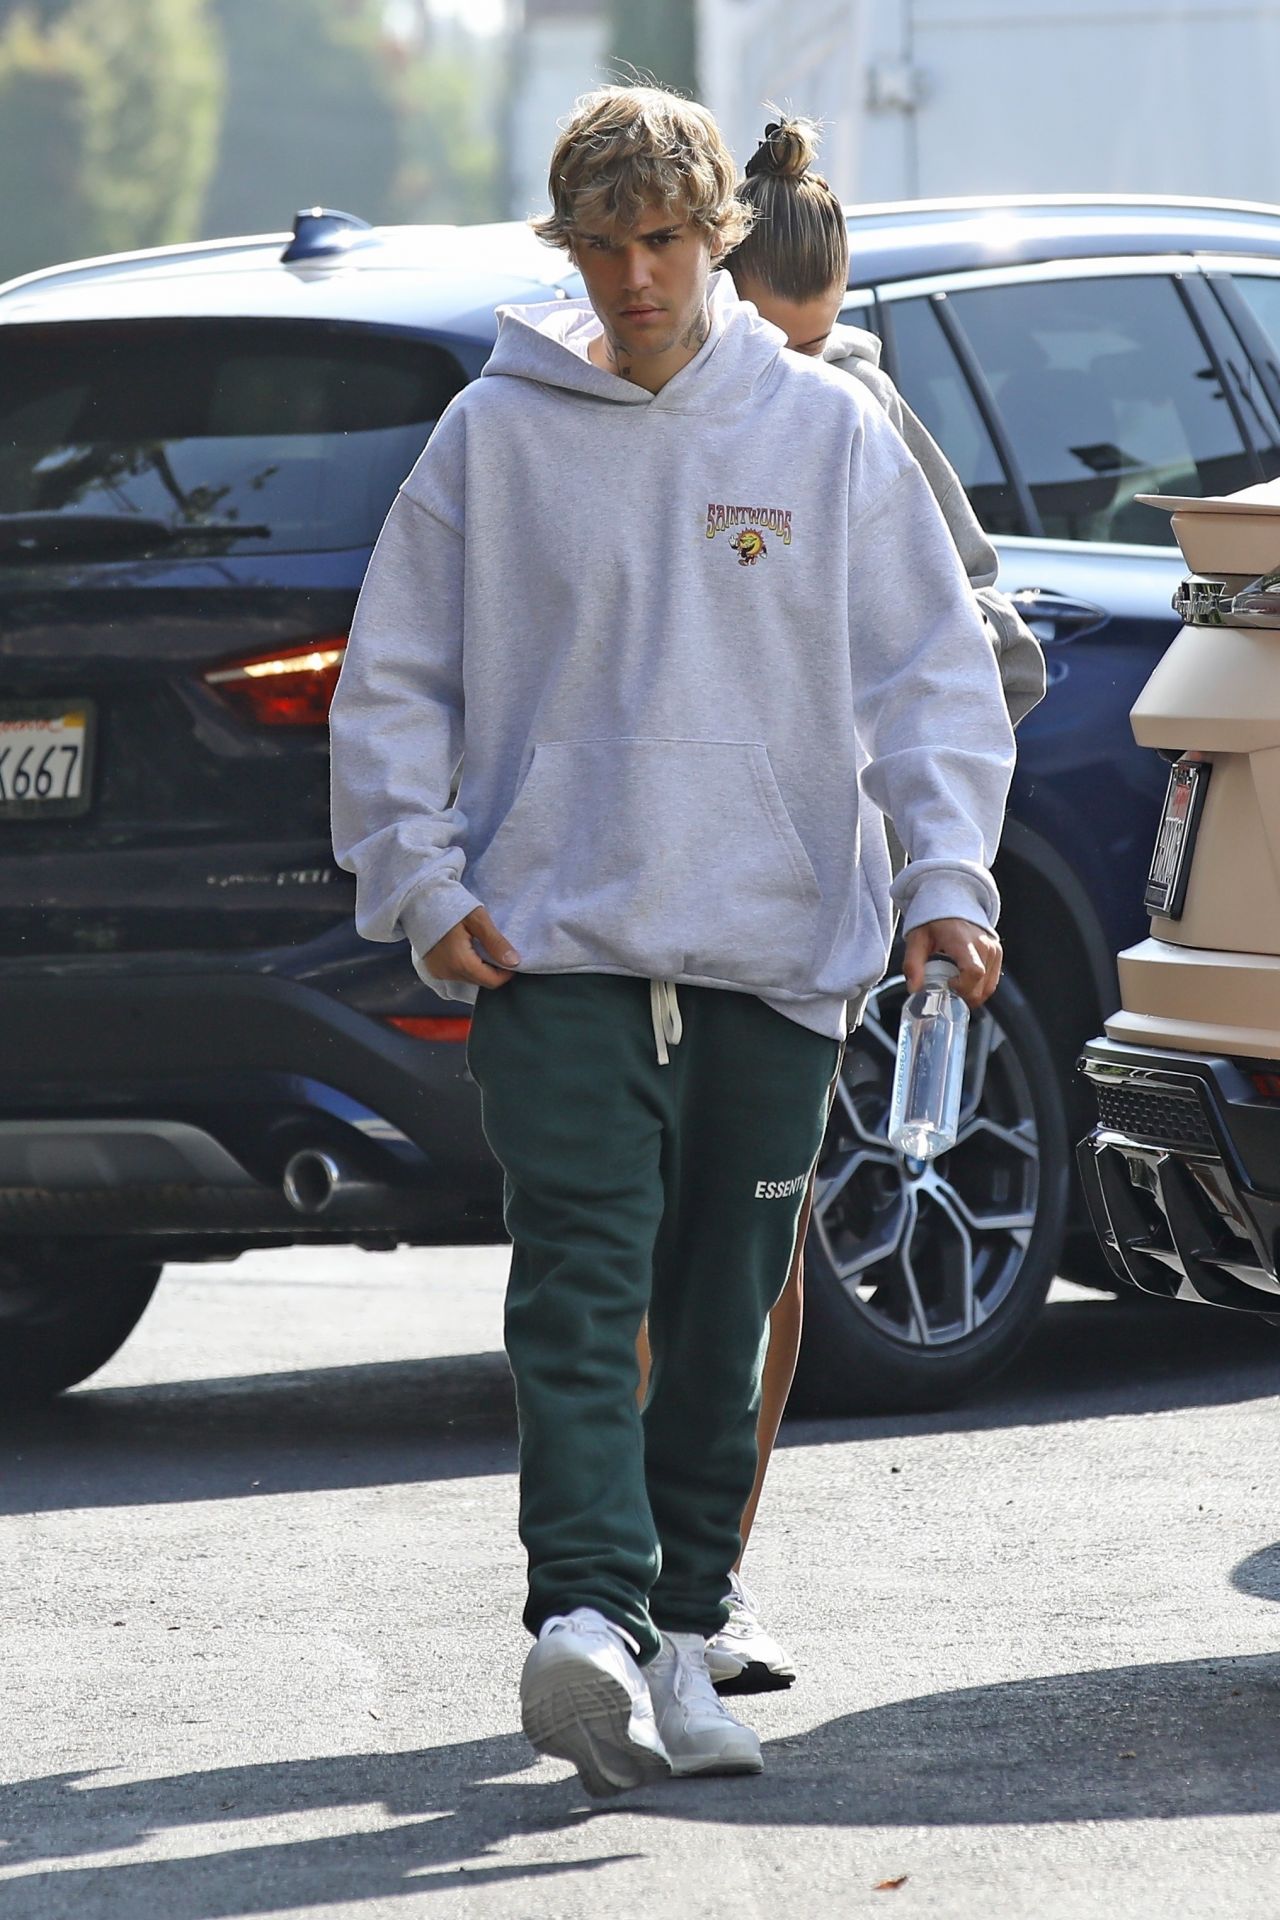 hailey-bieber-and-justin-bieber-out-in-west-hollywood-09-23-2020-8.jpg